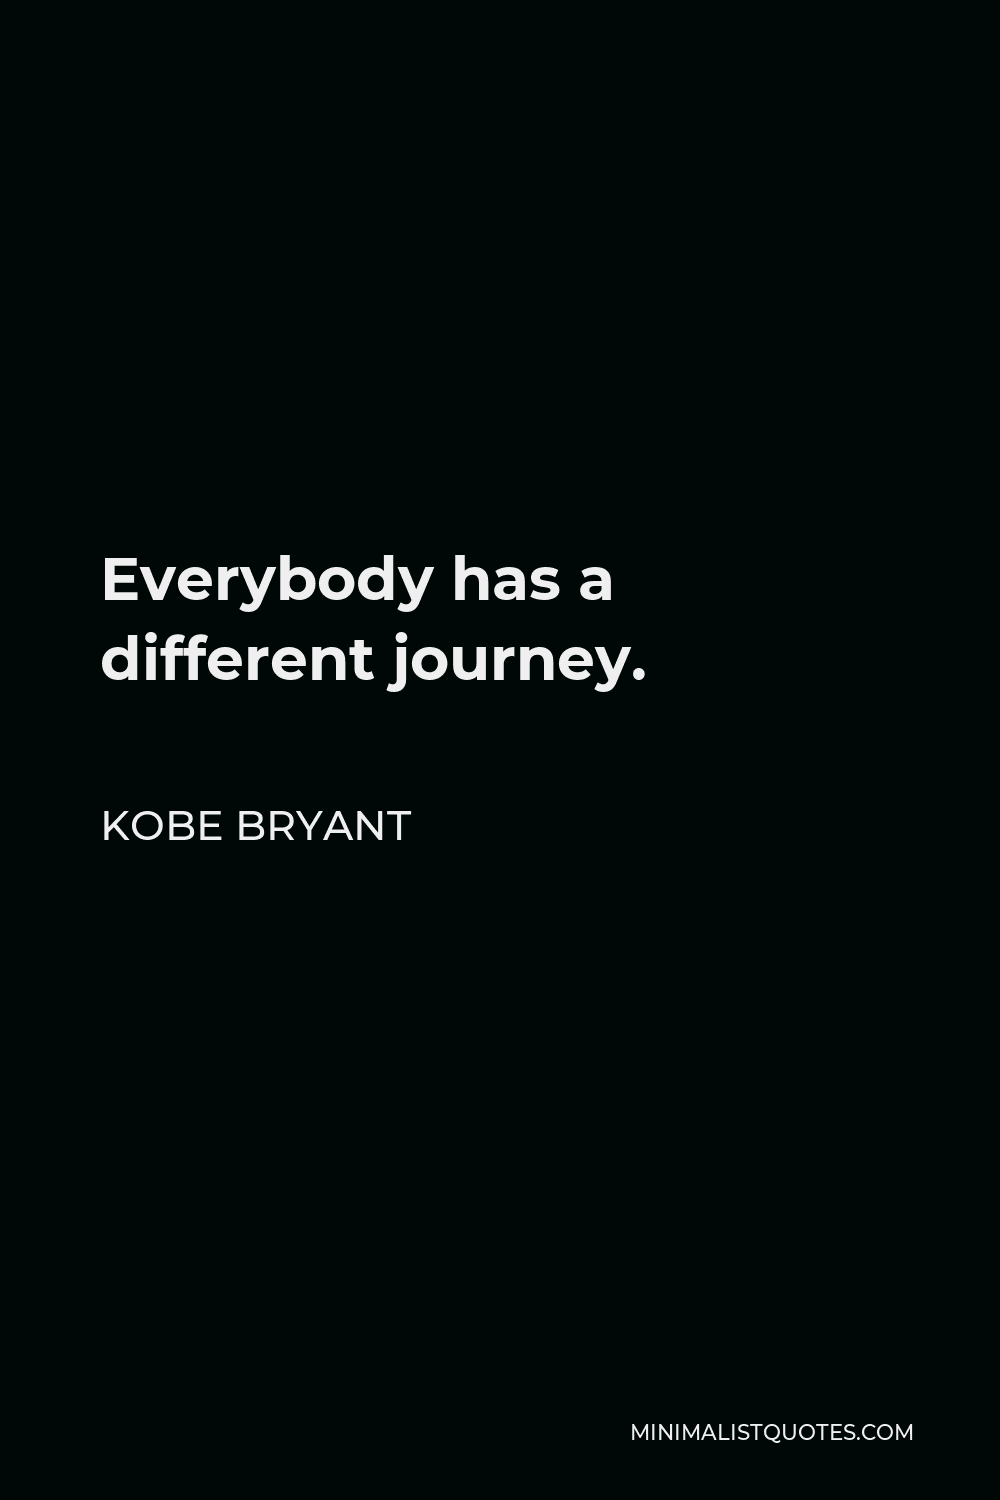 Kobe Bryant Quote - Everybody has a different journey.